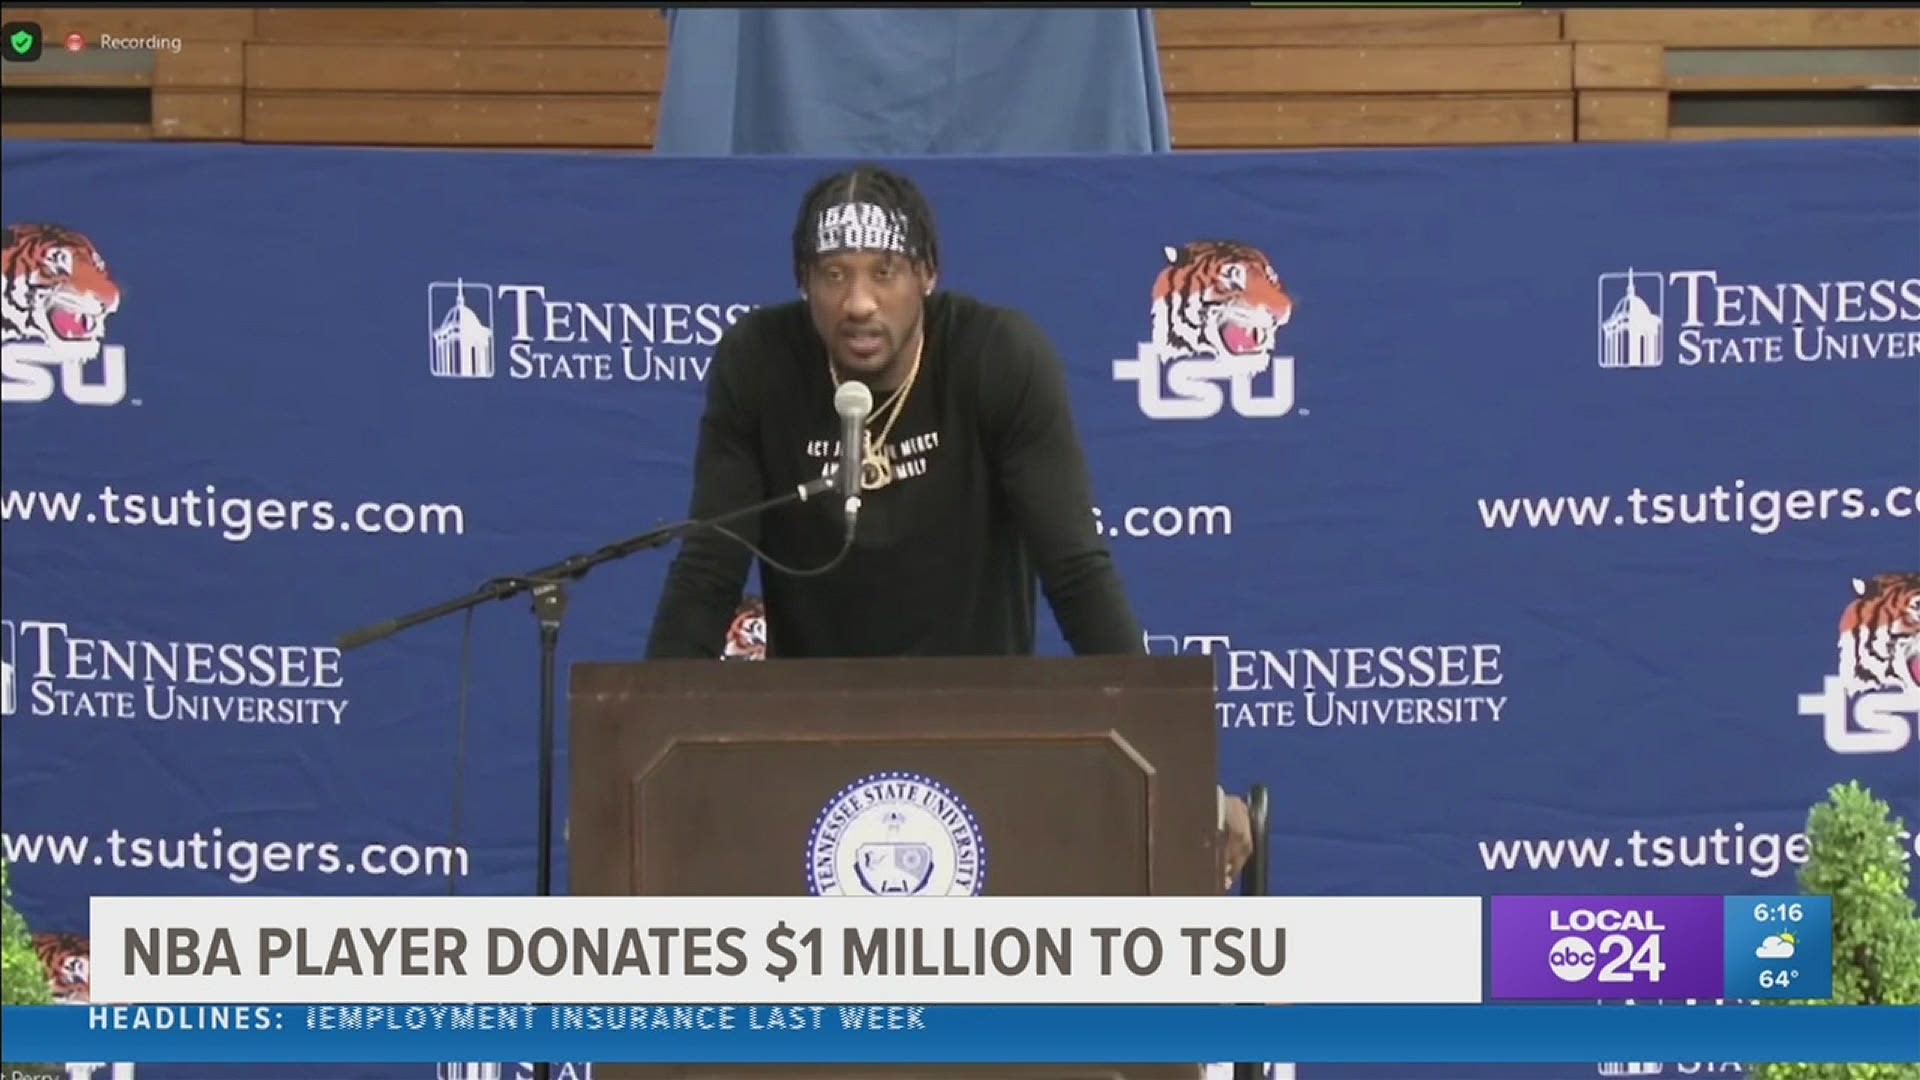 Houston Rockets Player Robert Covington played for TSU from 2009 to 2013. He made the donation Thursday.
alma mater Thursday.